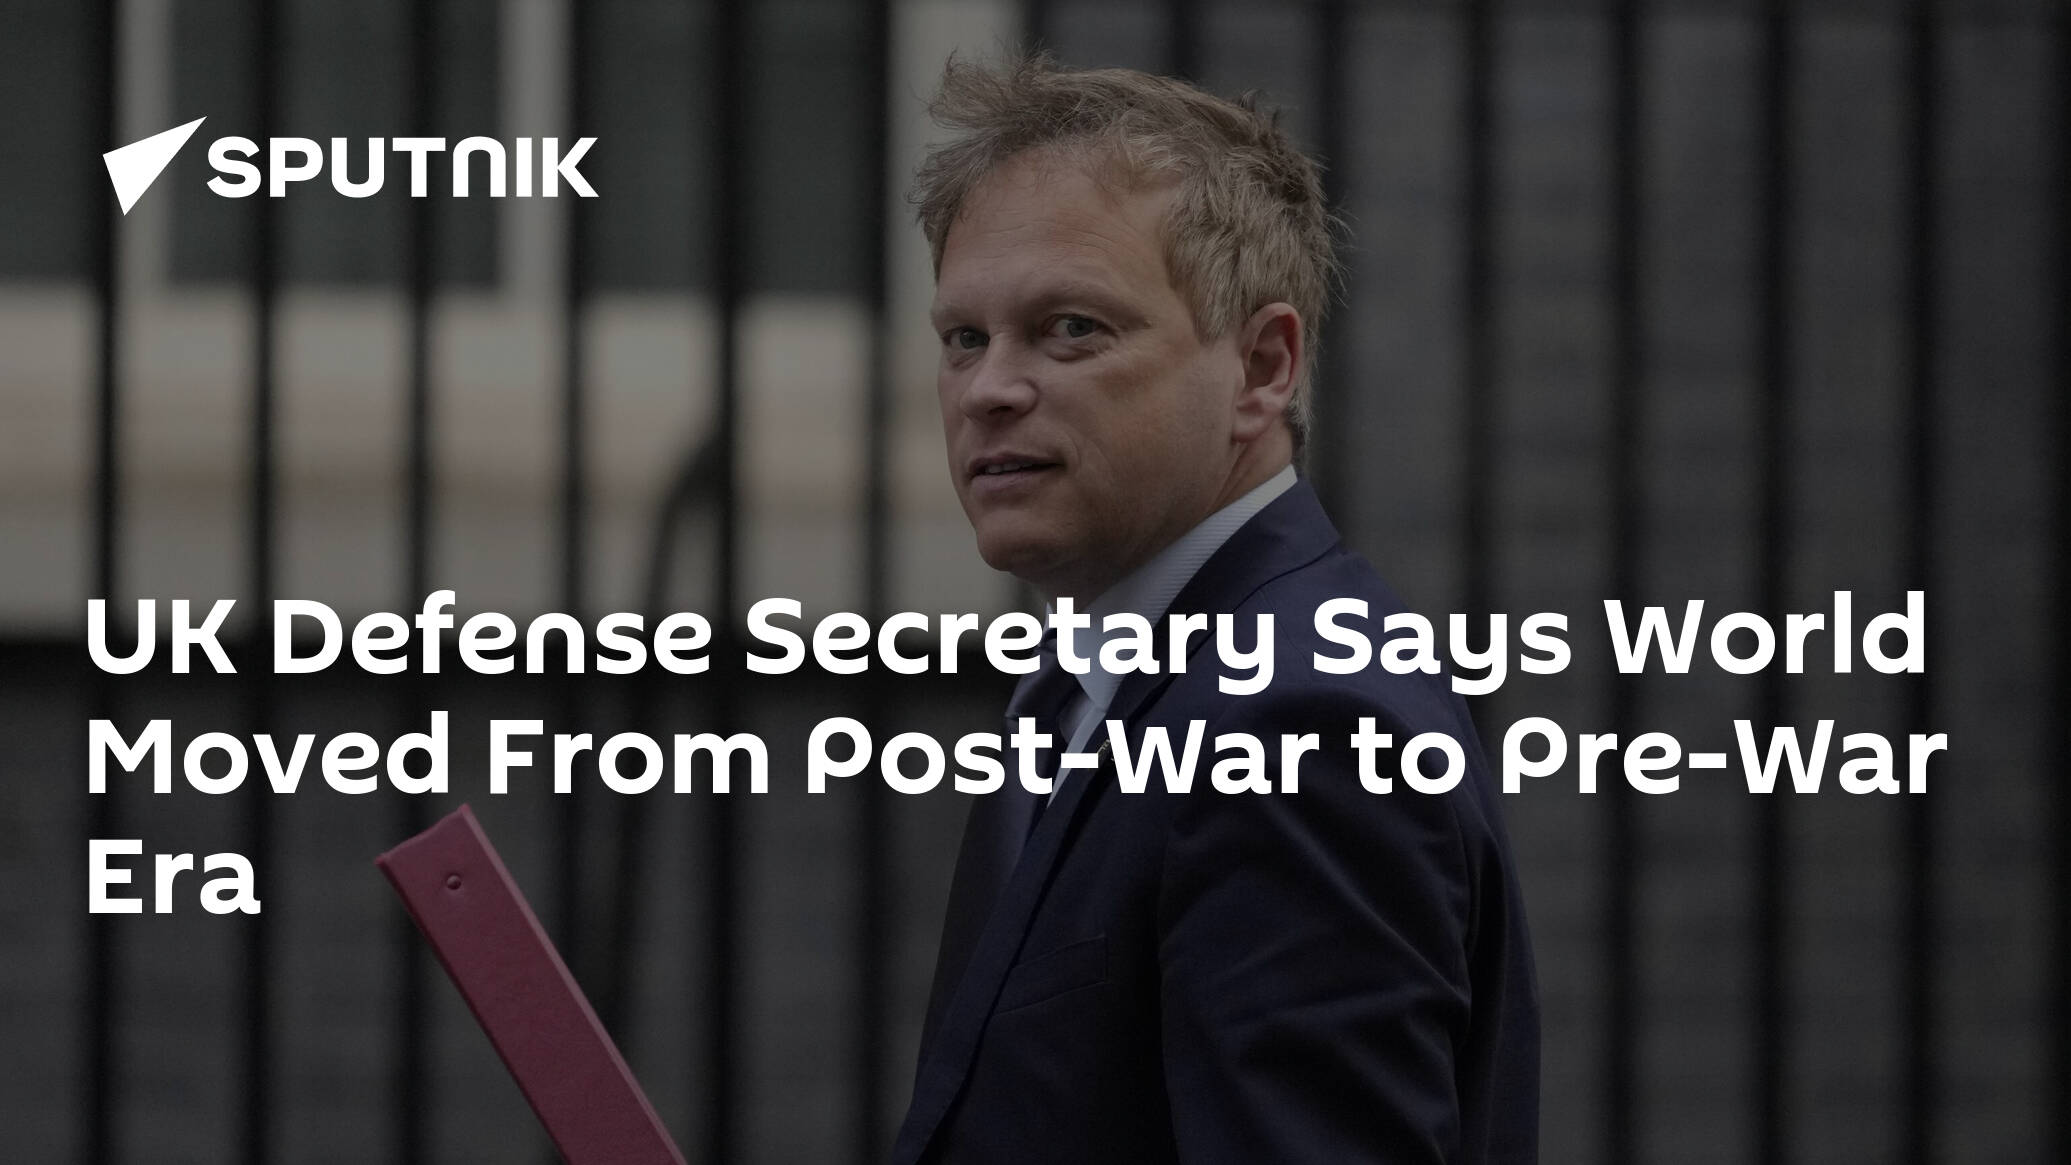 UK Defense Secretary Says World Moved From Post-War to Pre-War Era